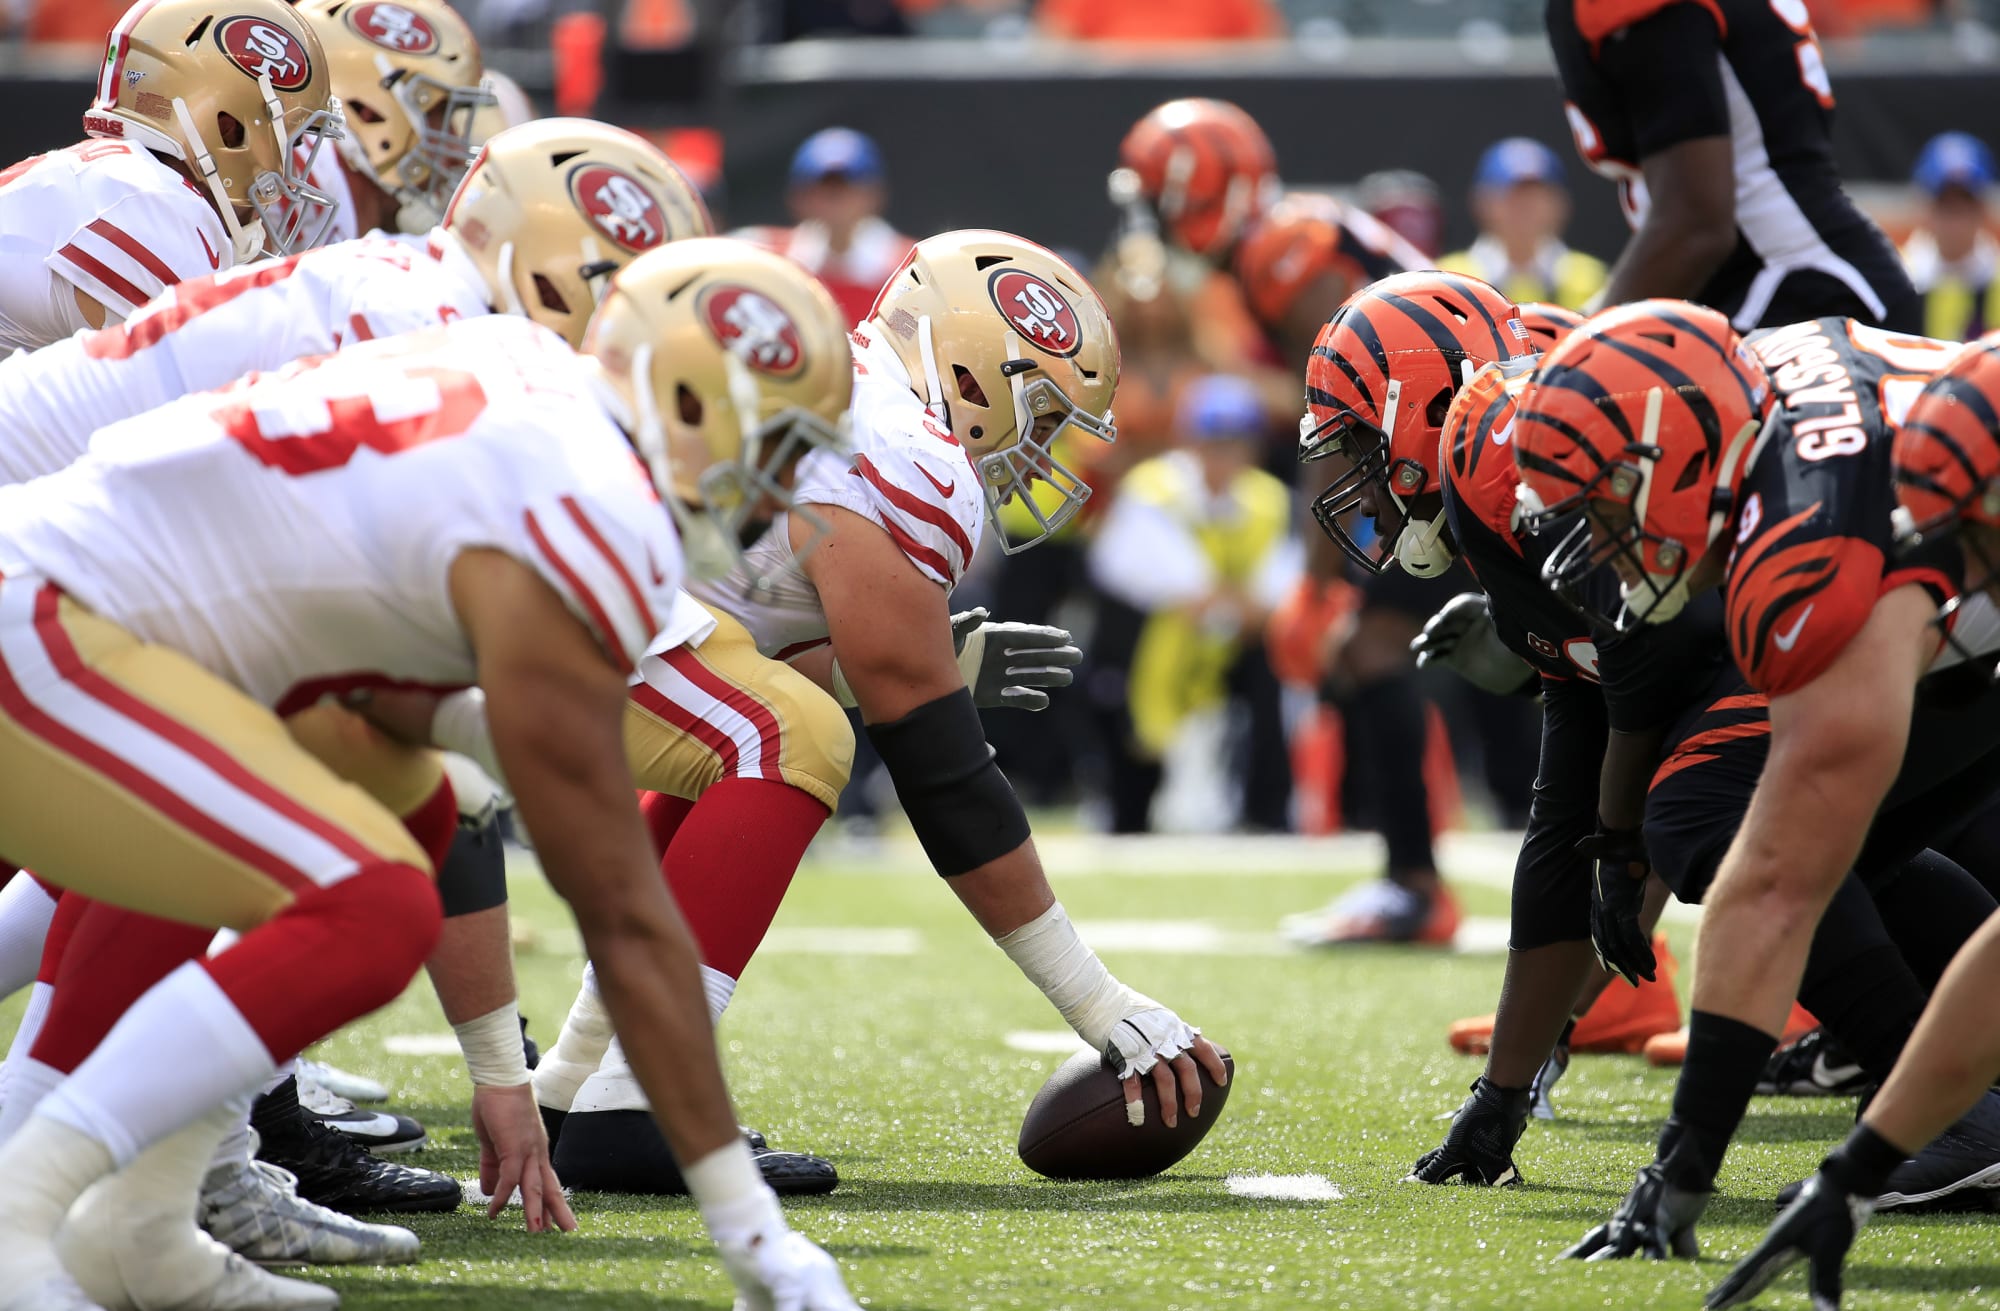 49ers game today 49ers vs. Bengals injury report, spread, over/under